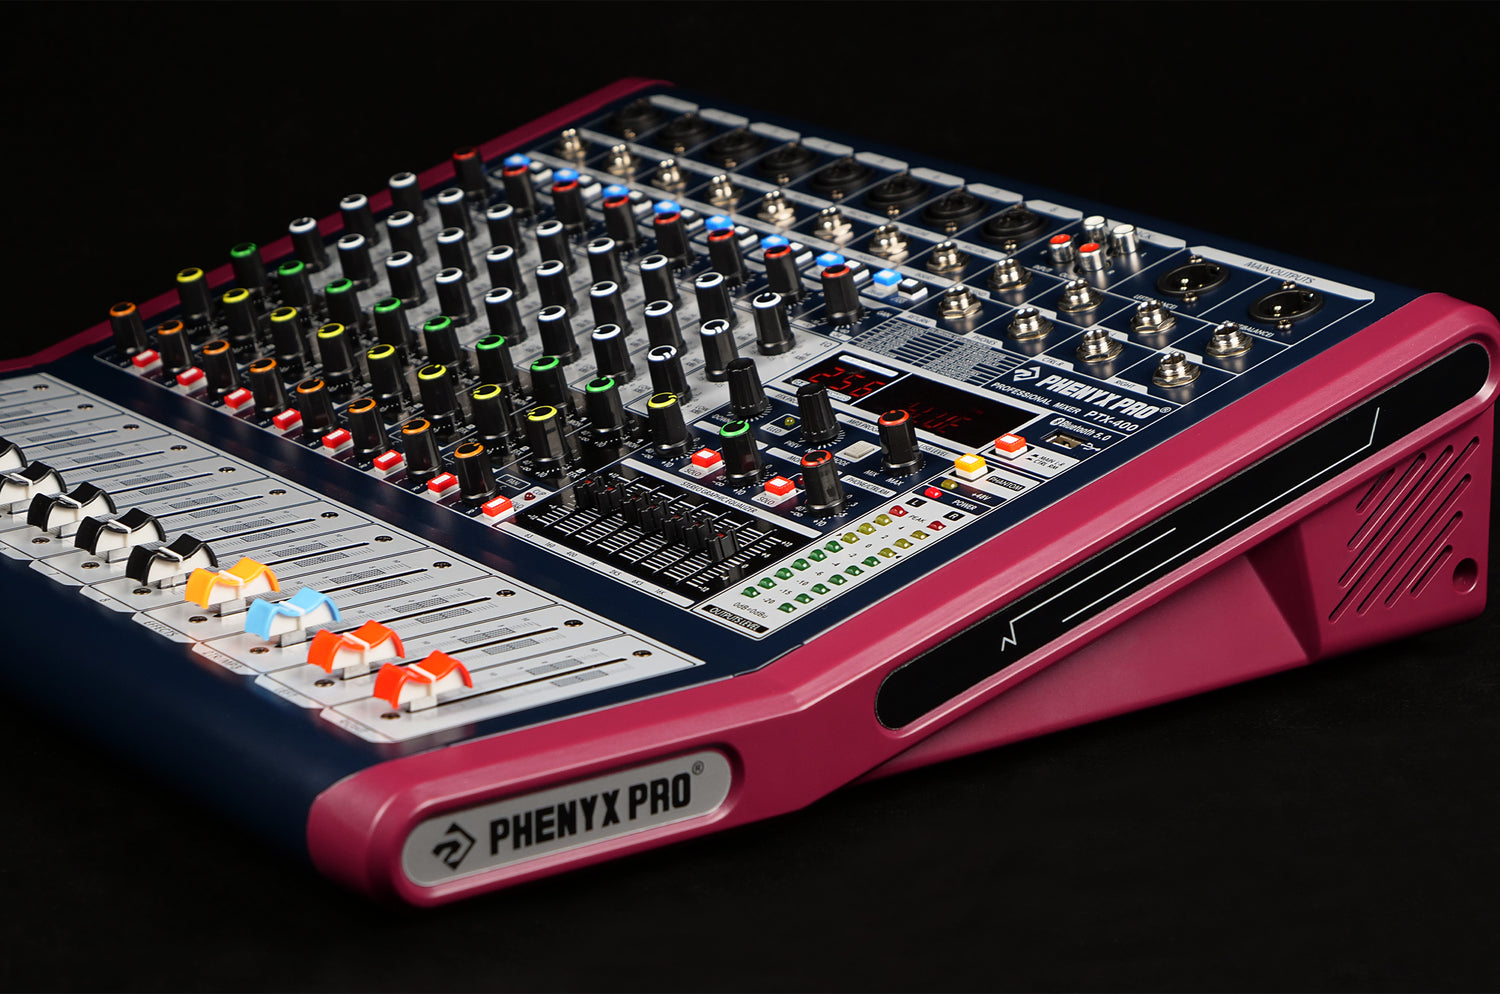 How to Use PC Function for the PTX-400 Audio Mixer